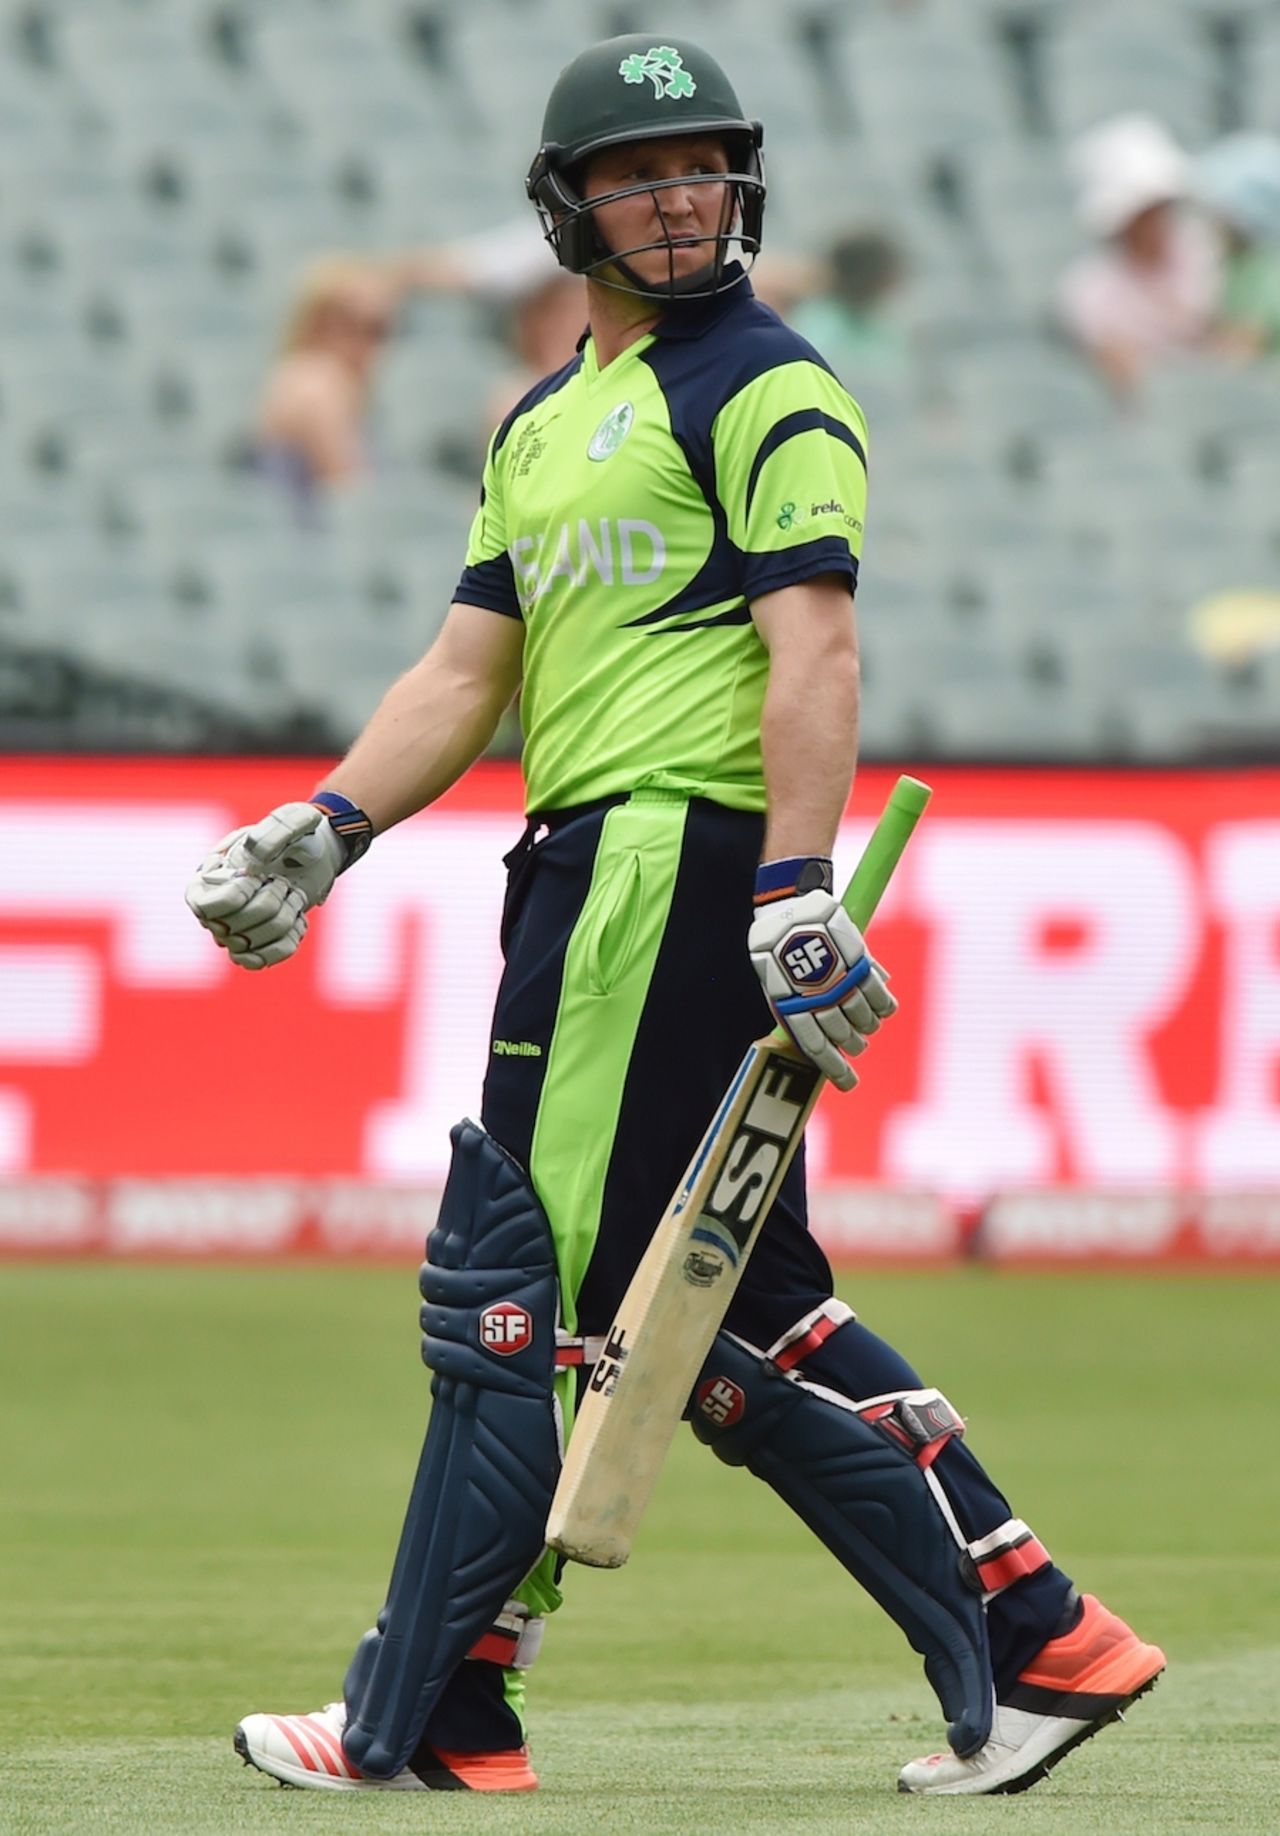 Gary Wilson walks back after scoring 29, Ireland v Pakistan, World Cup 2015, Group B, Adelaide, March 15, 2015